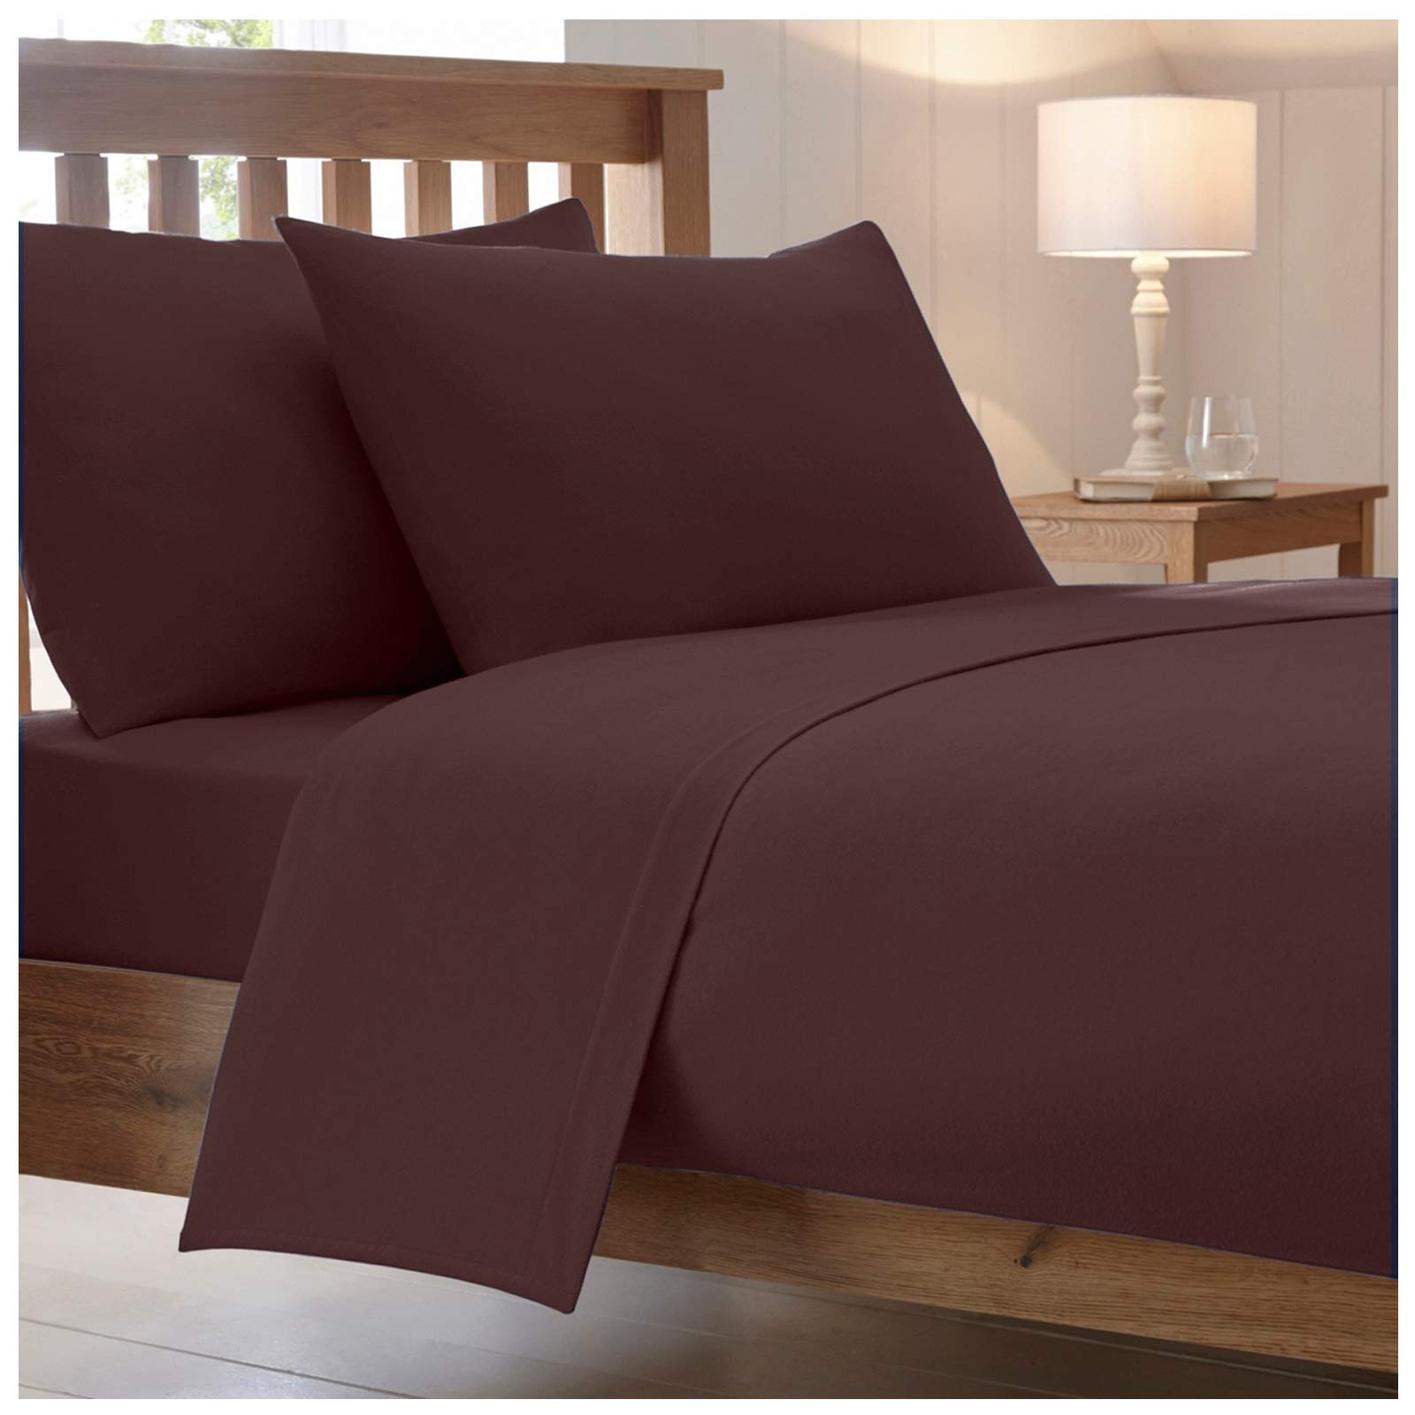 Catherine Lansfield Combed Percale Non-Iron Sheeting, Chocolate